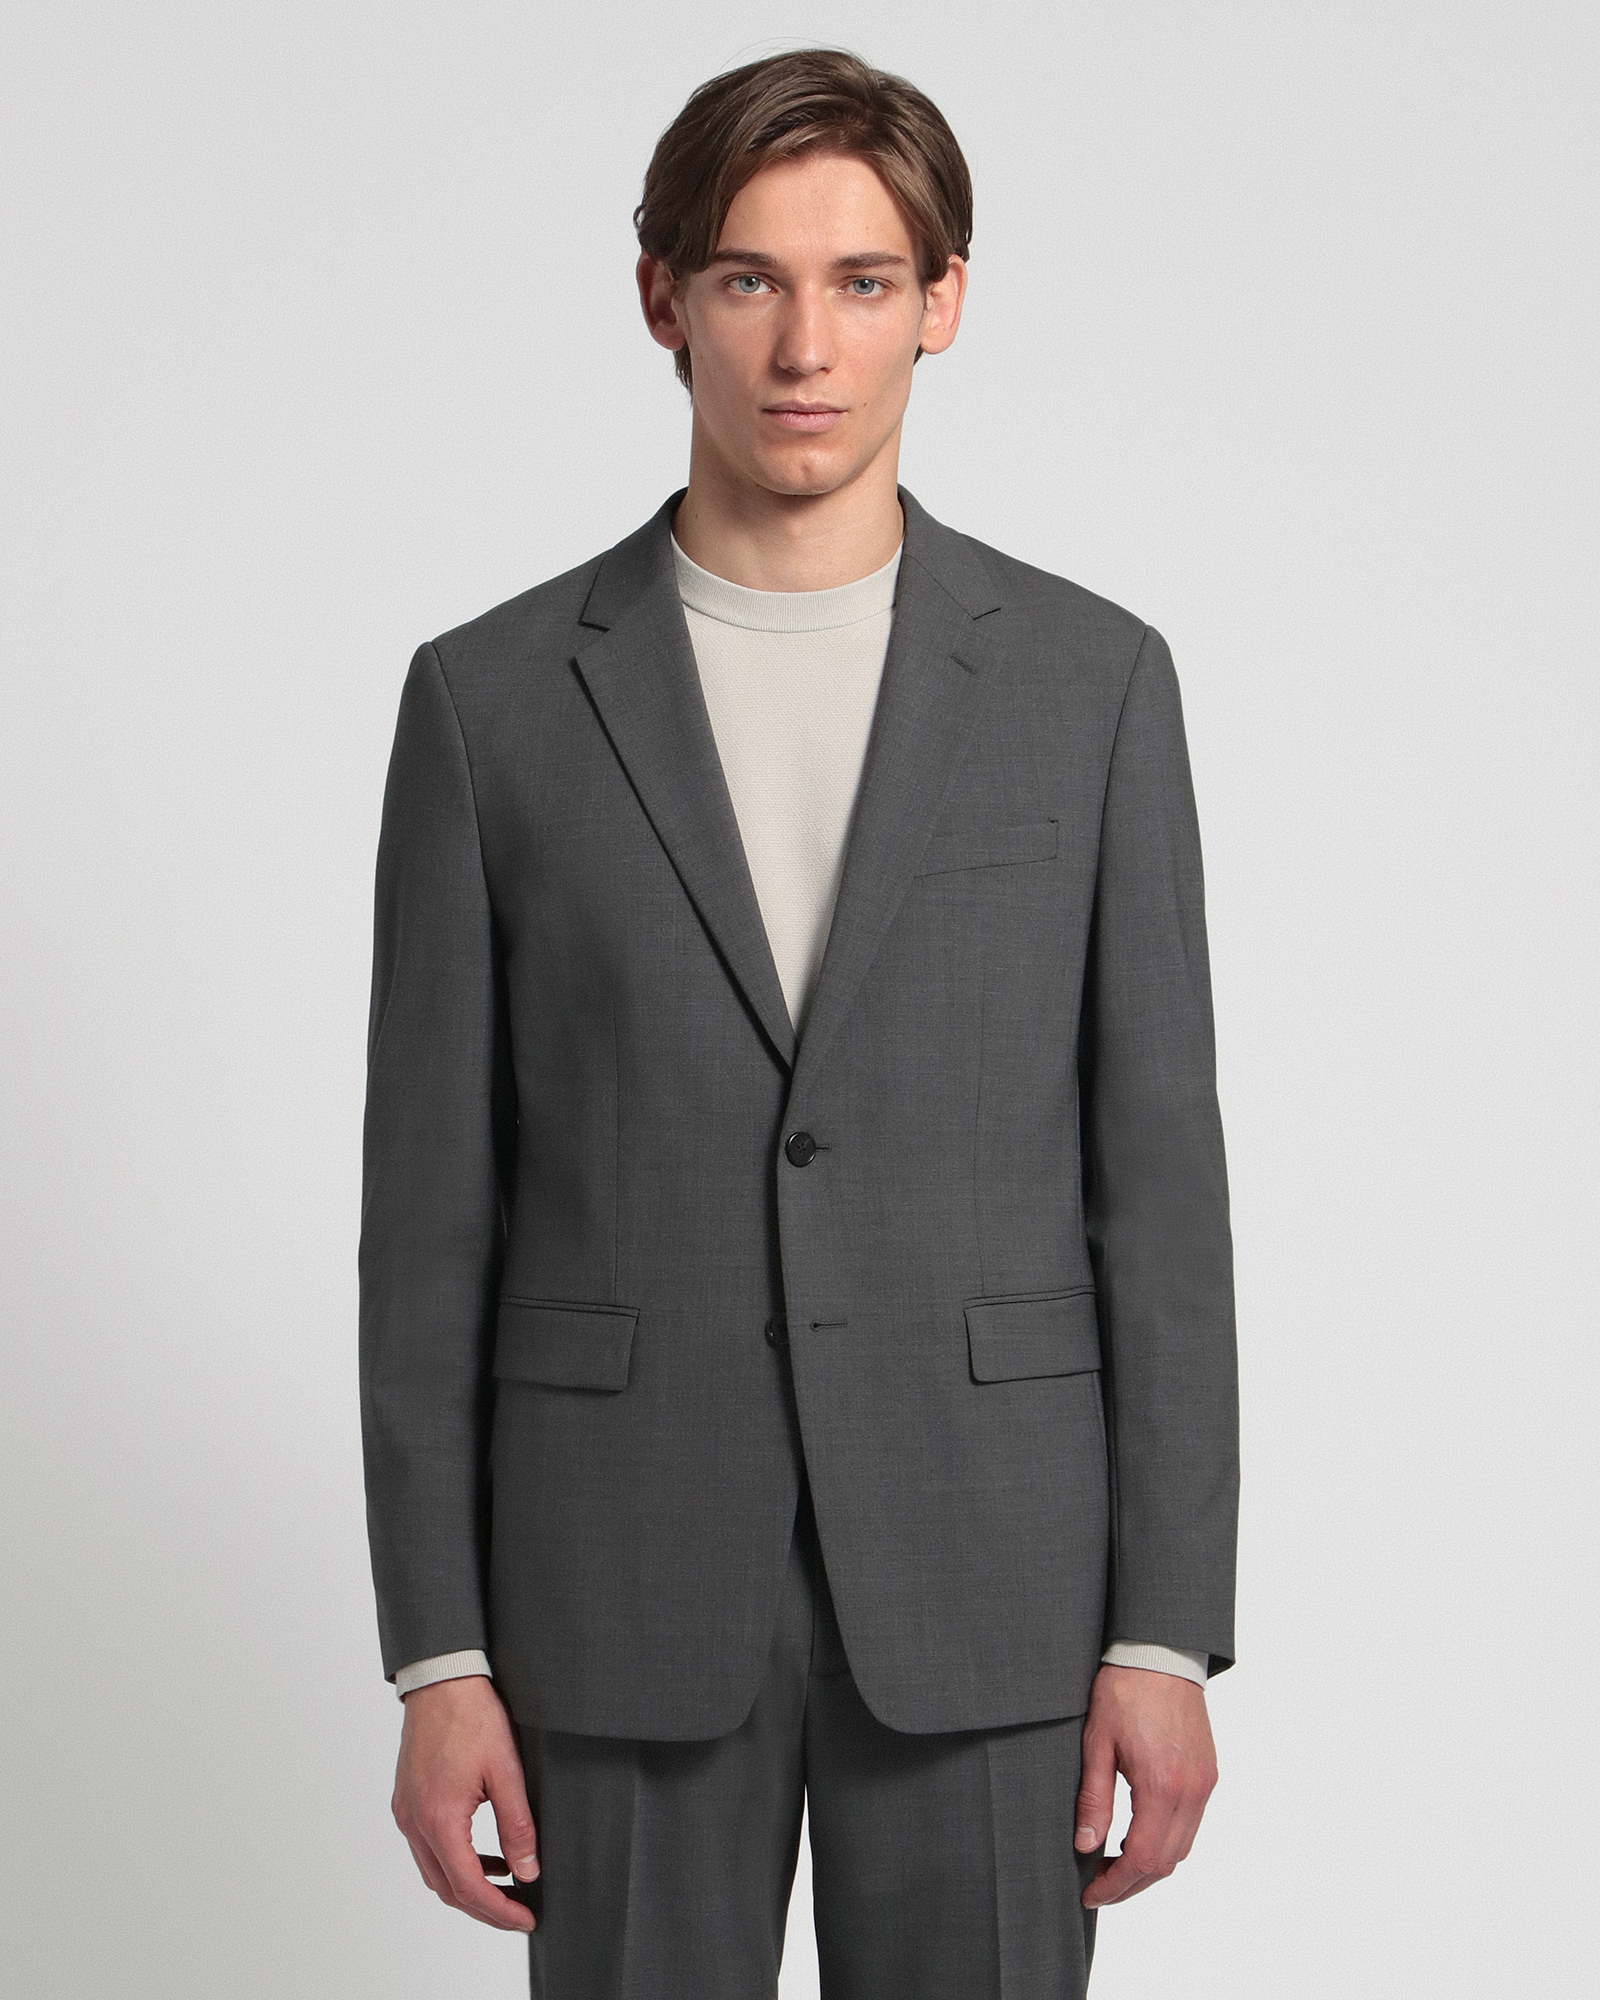 New Tailor 2 Chambers A | MEN | Theory [セオリー] 公式通販サイト